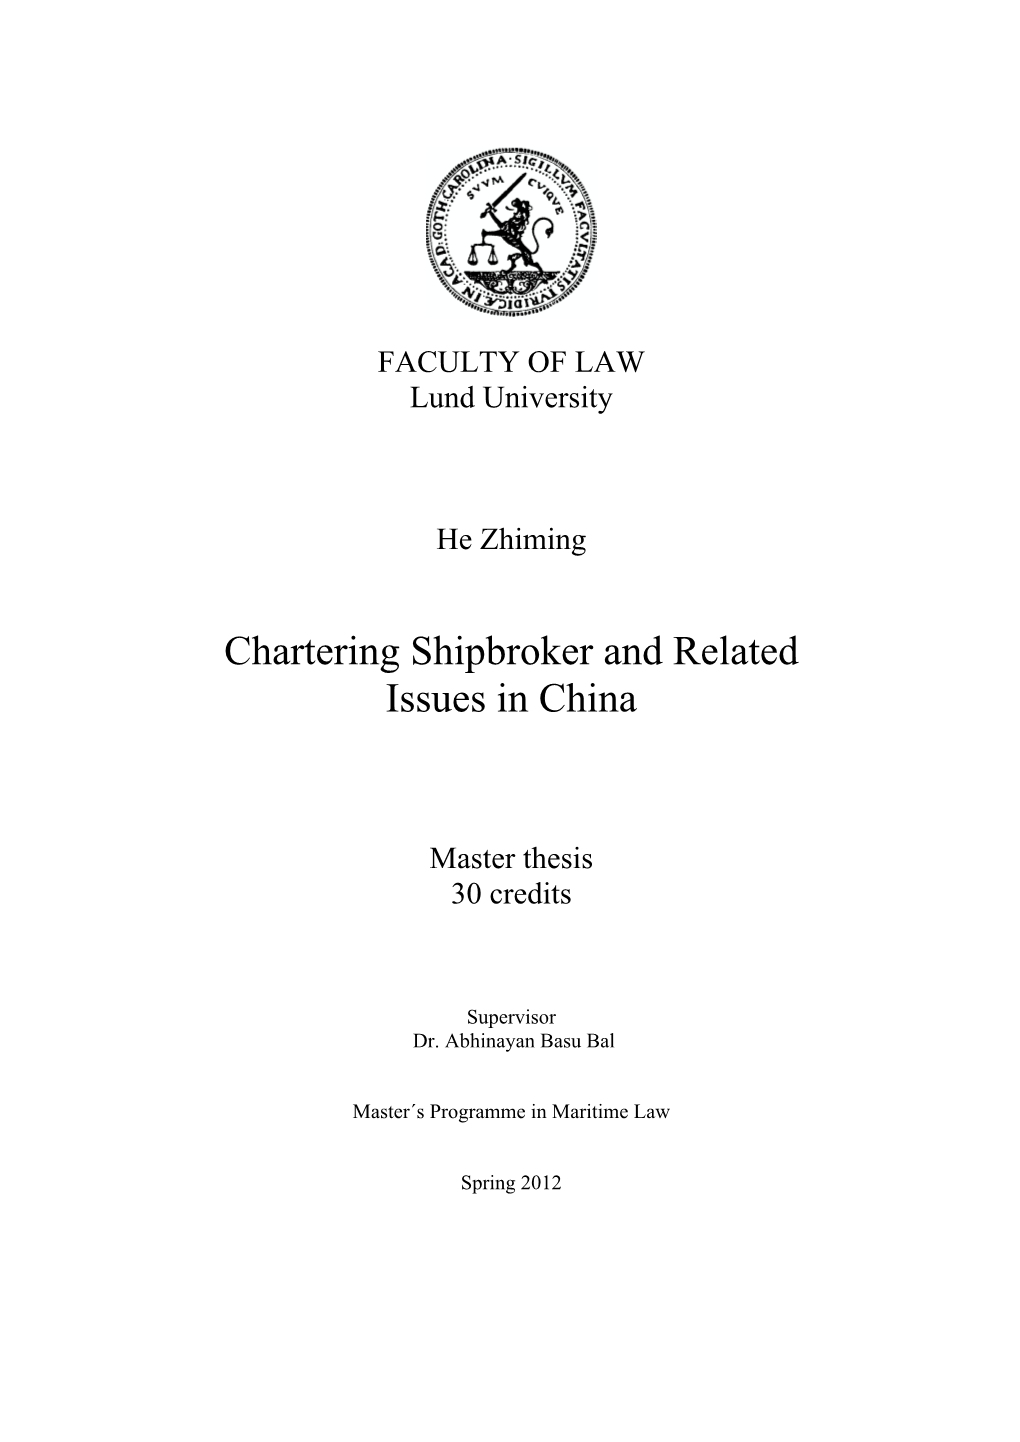 Chartering Shipbroker and Related Issues in China